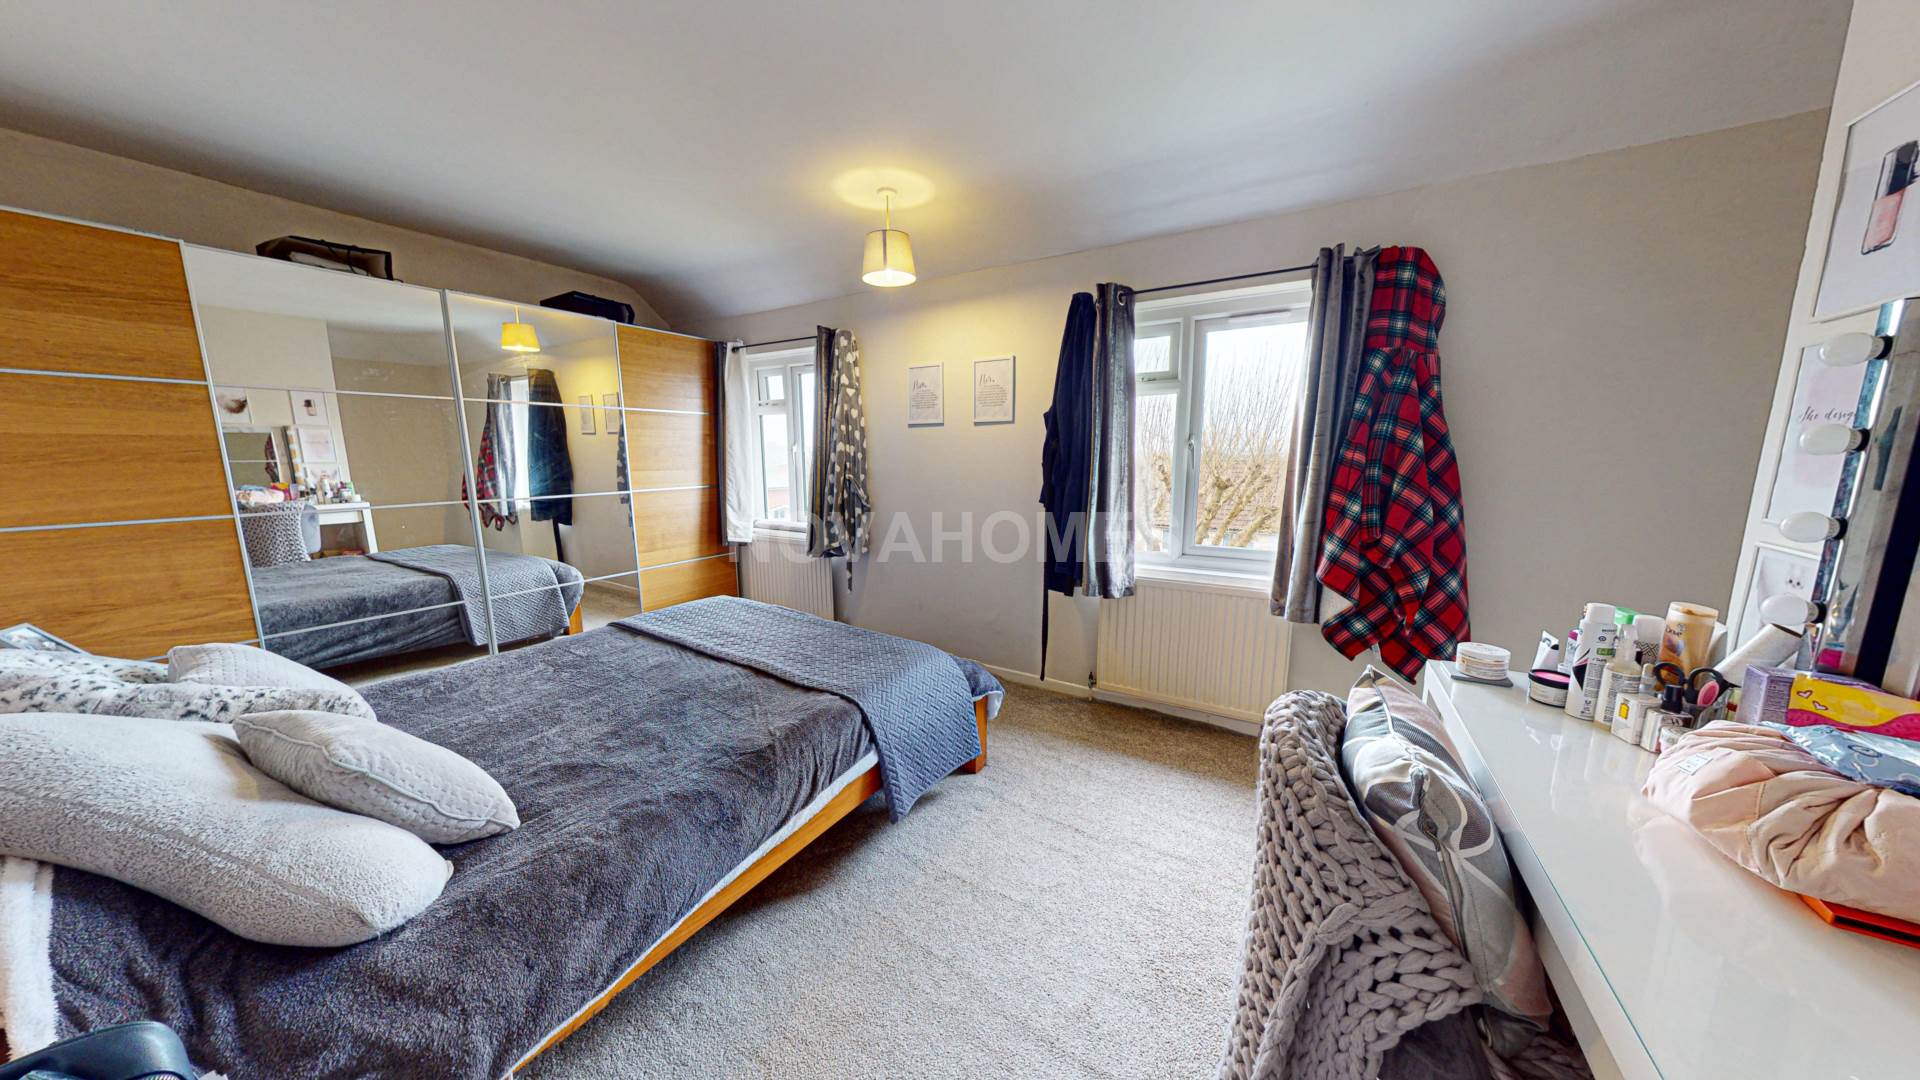 Brentford Avenue, Whitleigh, PL5 4HD, Image 5